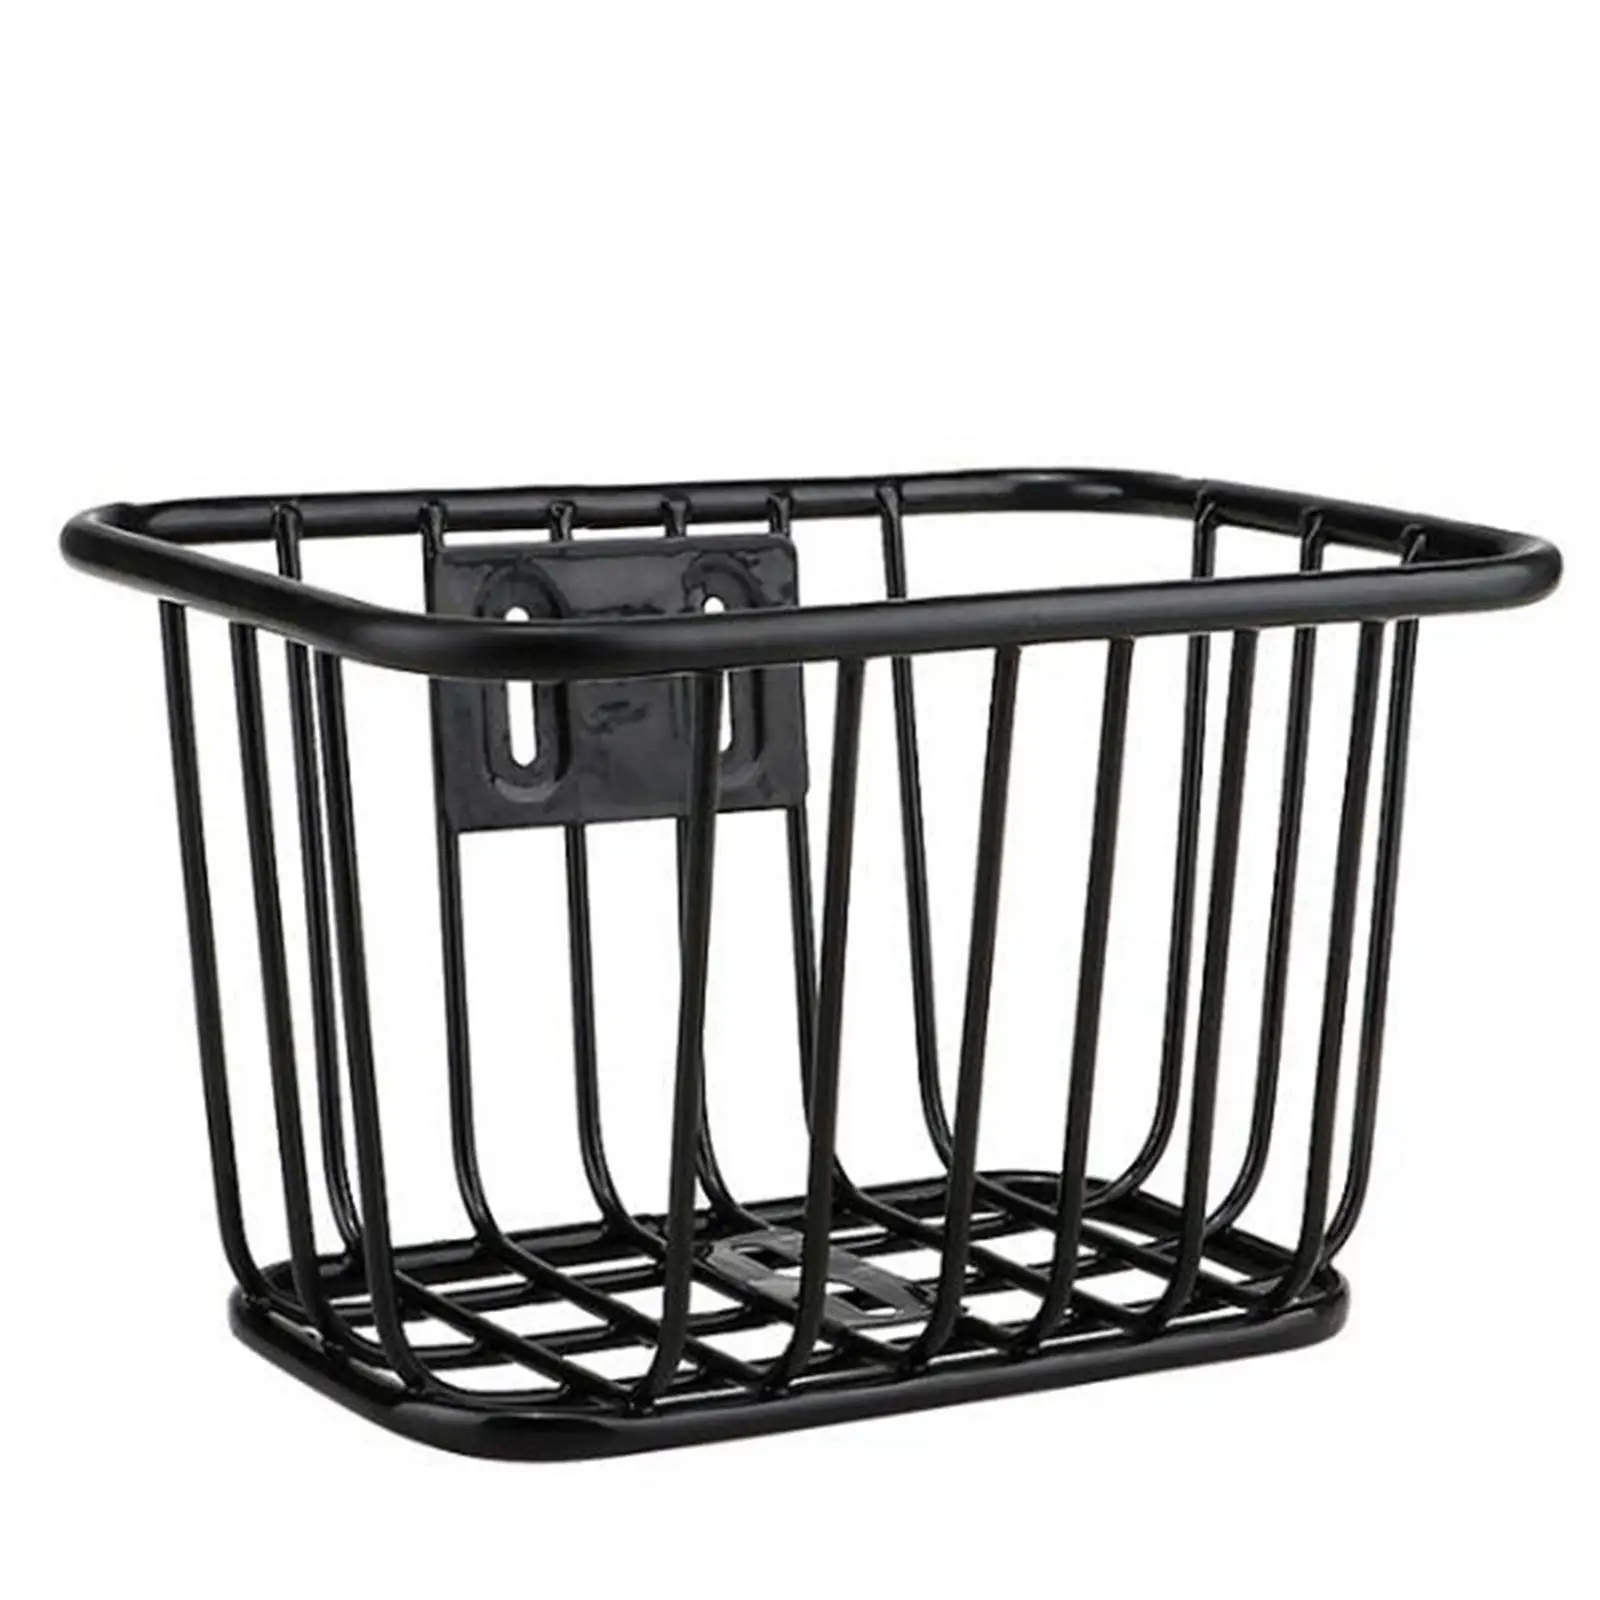 Kids Bike Basket Front Iron Durable Easy to Install Removable Waterproof Bicycle Basket for Kids and Adults Bike Accessory